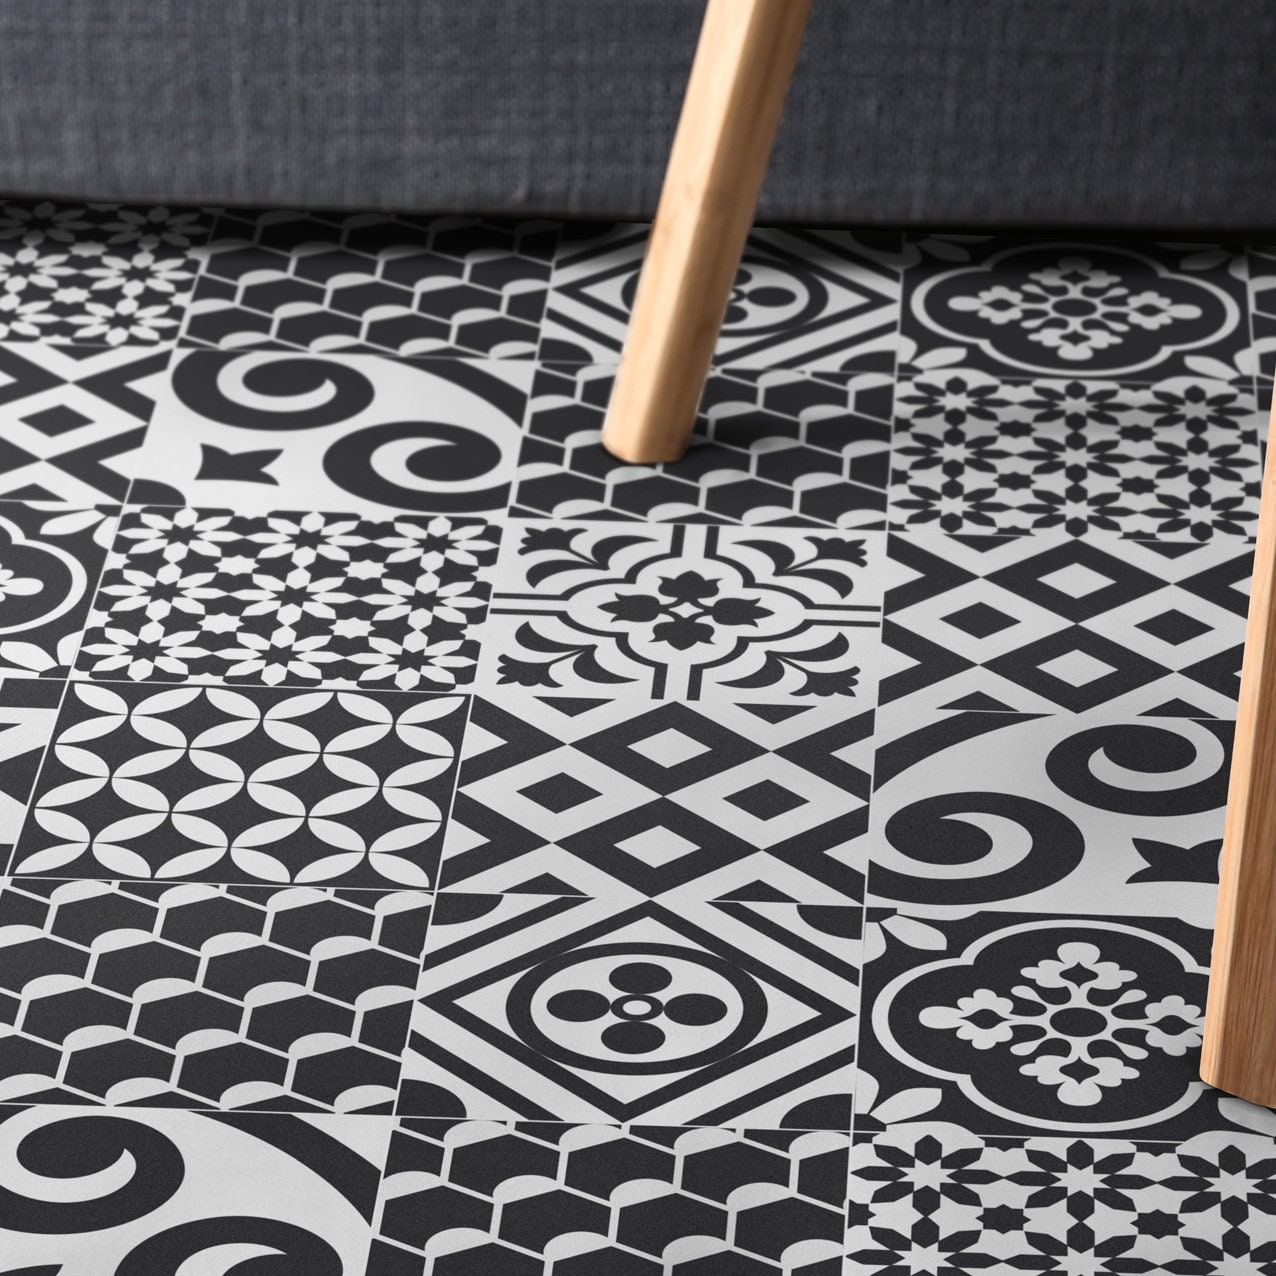 Eclectic Black and White Tiles. Vinyl Floor Mat With Geometric - Etsy